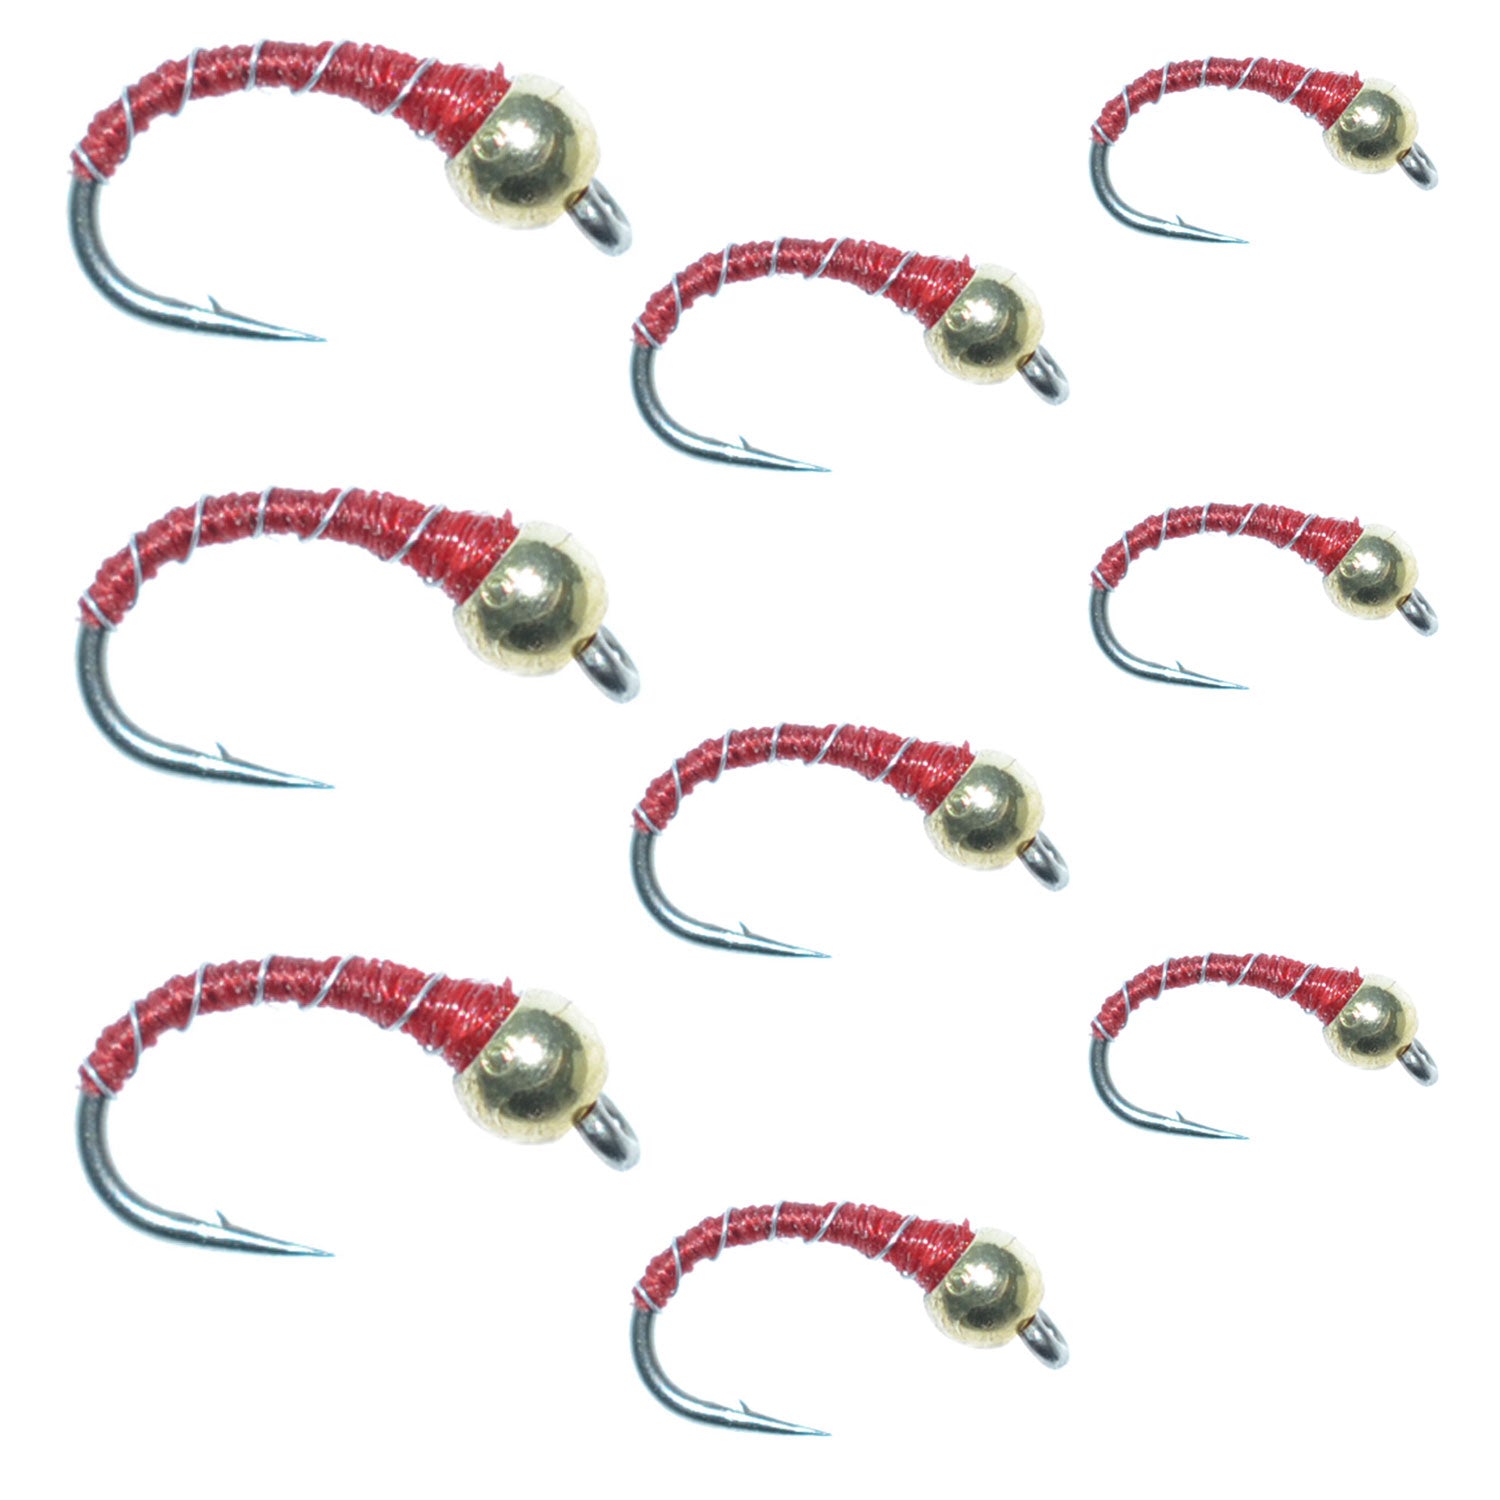 Red Zebra Midge Assortment 3 Each of 3 Sizes 14, 16, 18 - Tailwater Fly Fishing Flies Collection